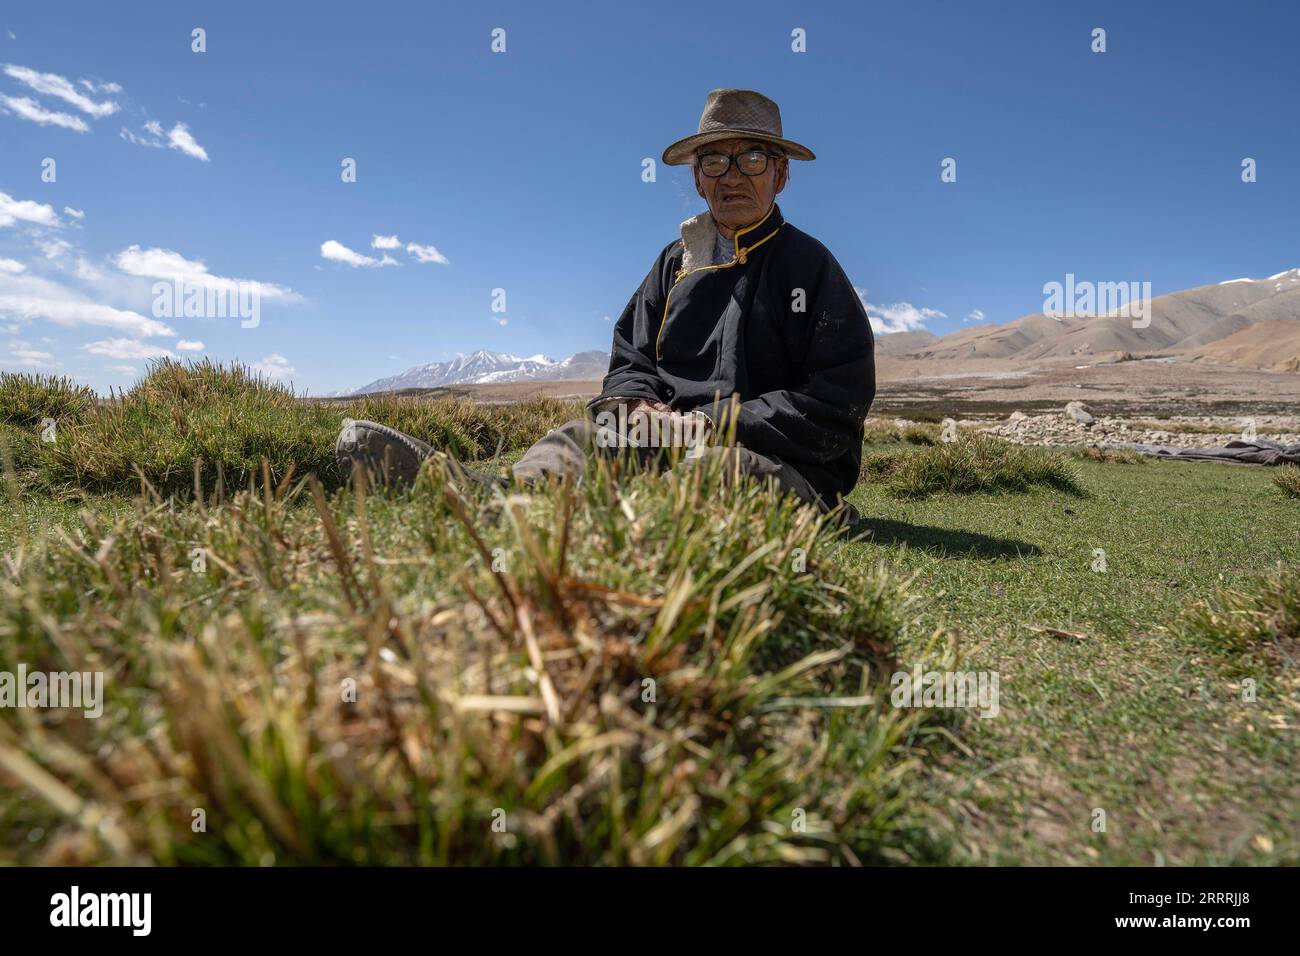 230531 -- NGARI, May 31, 2023 -- Losang Zhamdu basks at a meadow in front of his residence in Demqog Village, Zhaxigang Township, Gar County in Ngari Prefecture of southwest China s Tibet Autonomous Region, May 28, 2023. Sitting in the sun outside his residence in Demqog Village, Zhaxigang Township, Gar County in Ngari Prefecture of Tibet, 84-year-old Losang Zhamdu told a story of the five homes he had lived in. My mother and I lived together in a tent made with yak hair, all our possessions were a goat fur jacket and a worn-out Tibetan blanket, recalled Losang Zhamdu, then a serf, on his chil Stock Photo